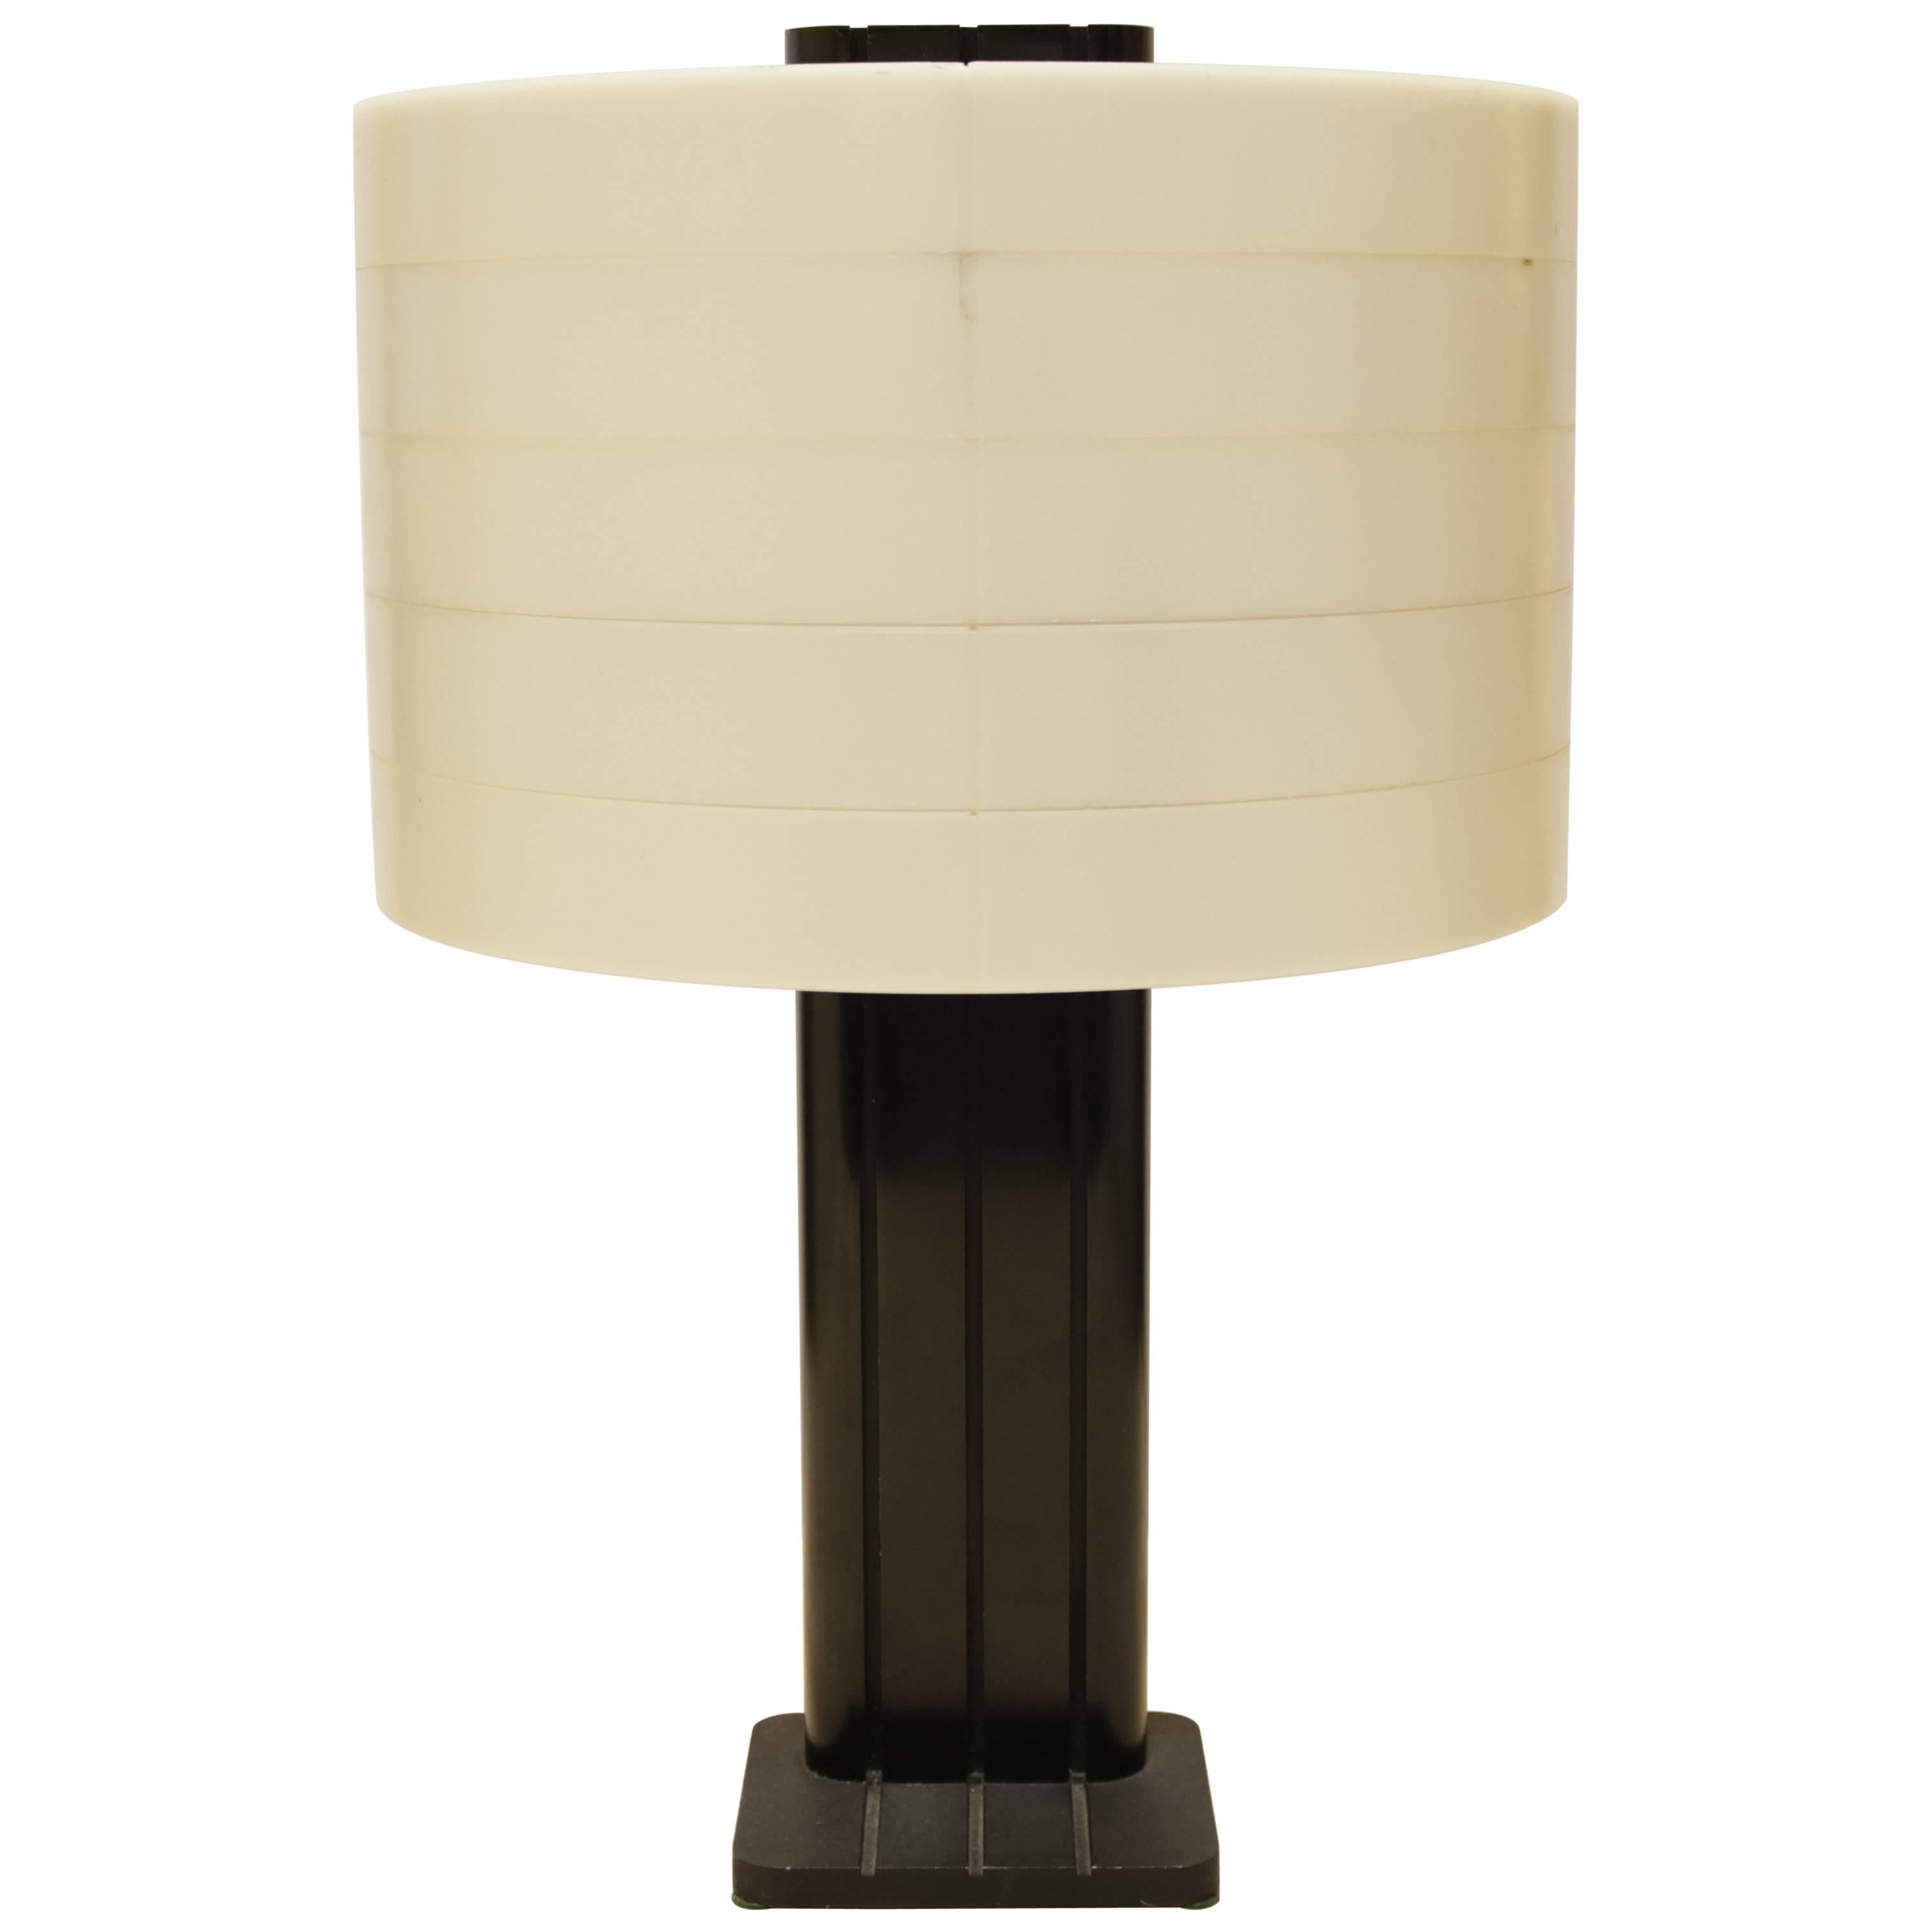 Cream and Black, 1970s Table Lamp